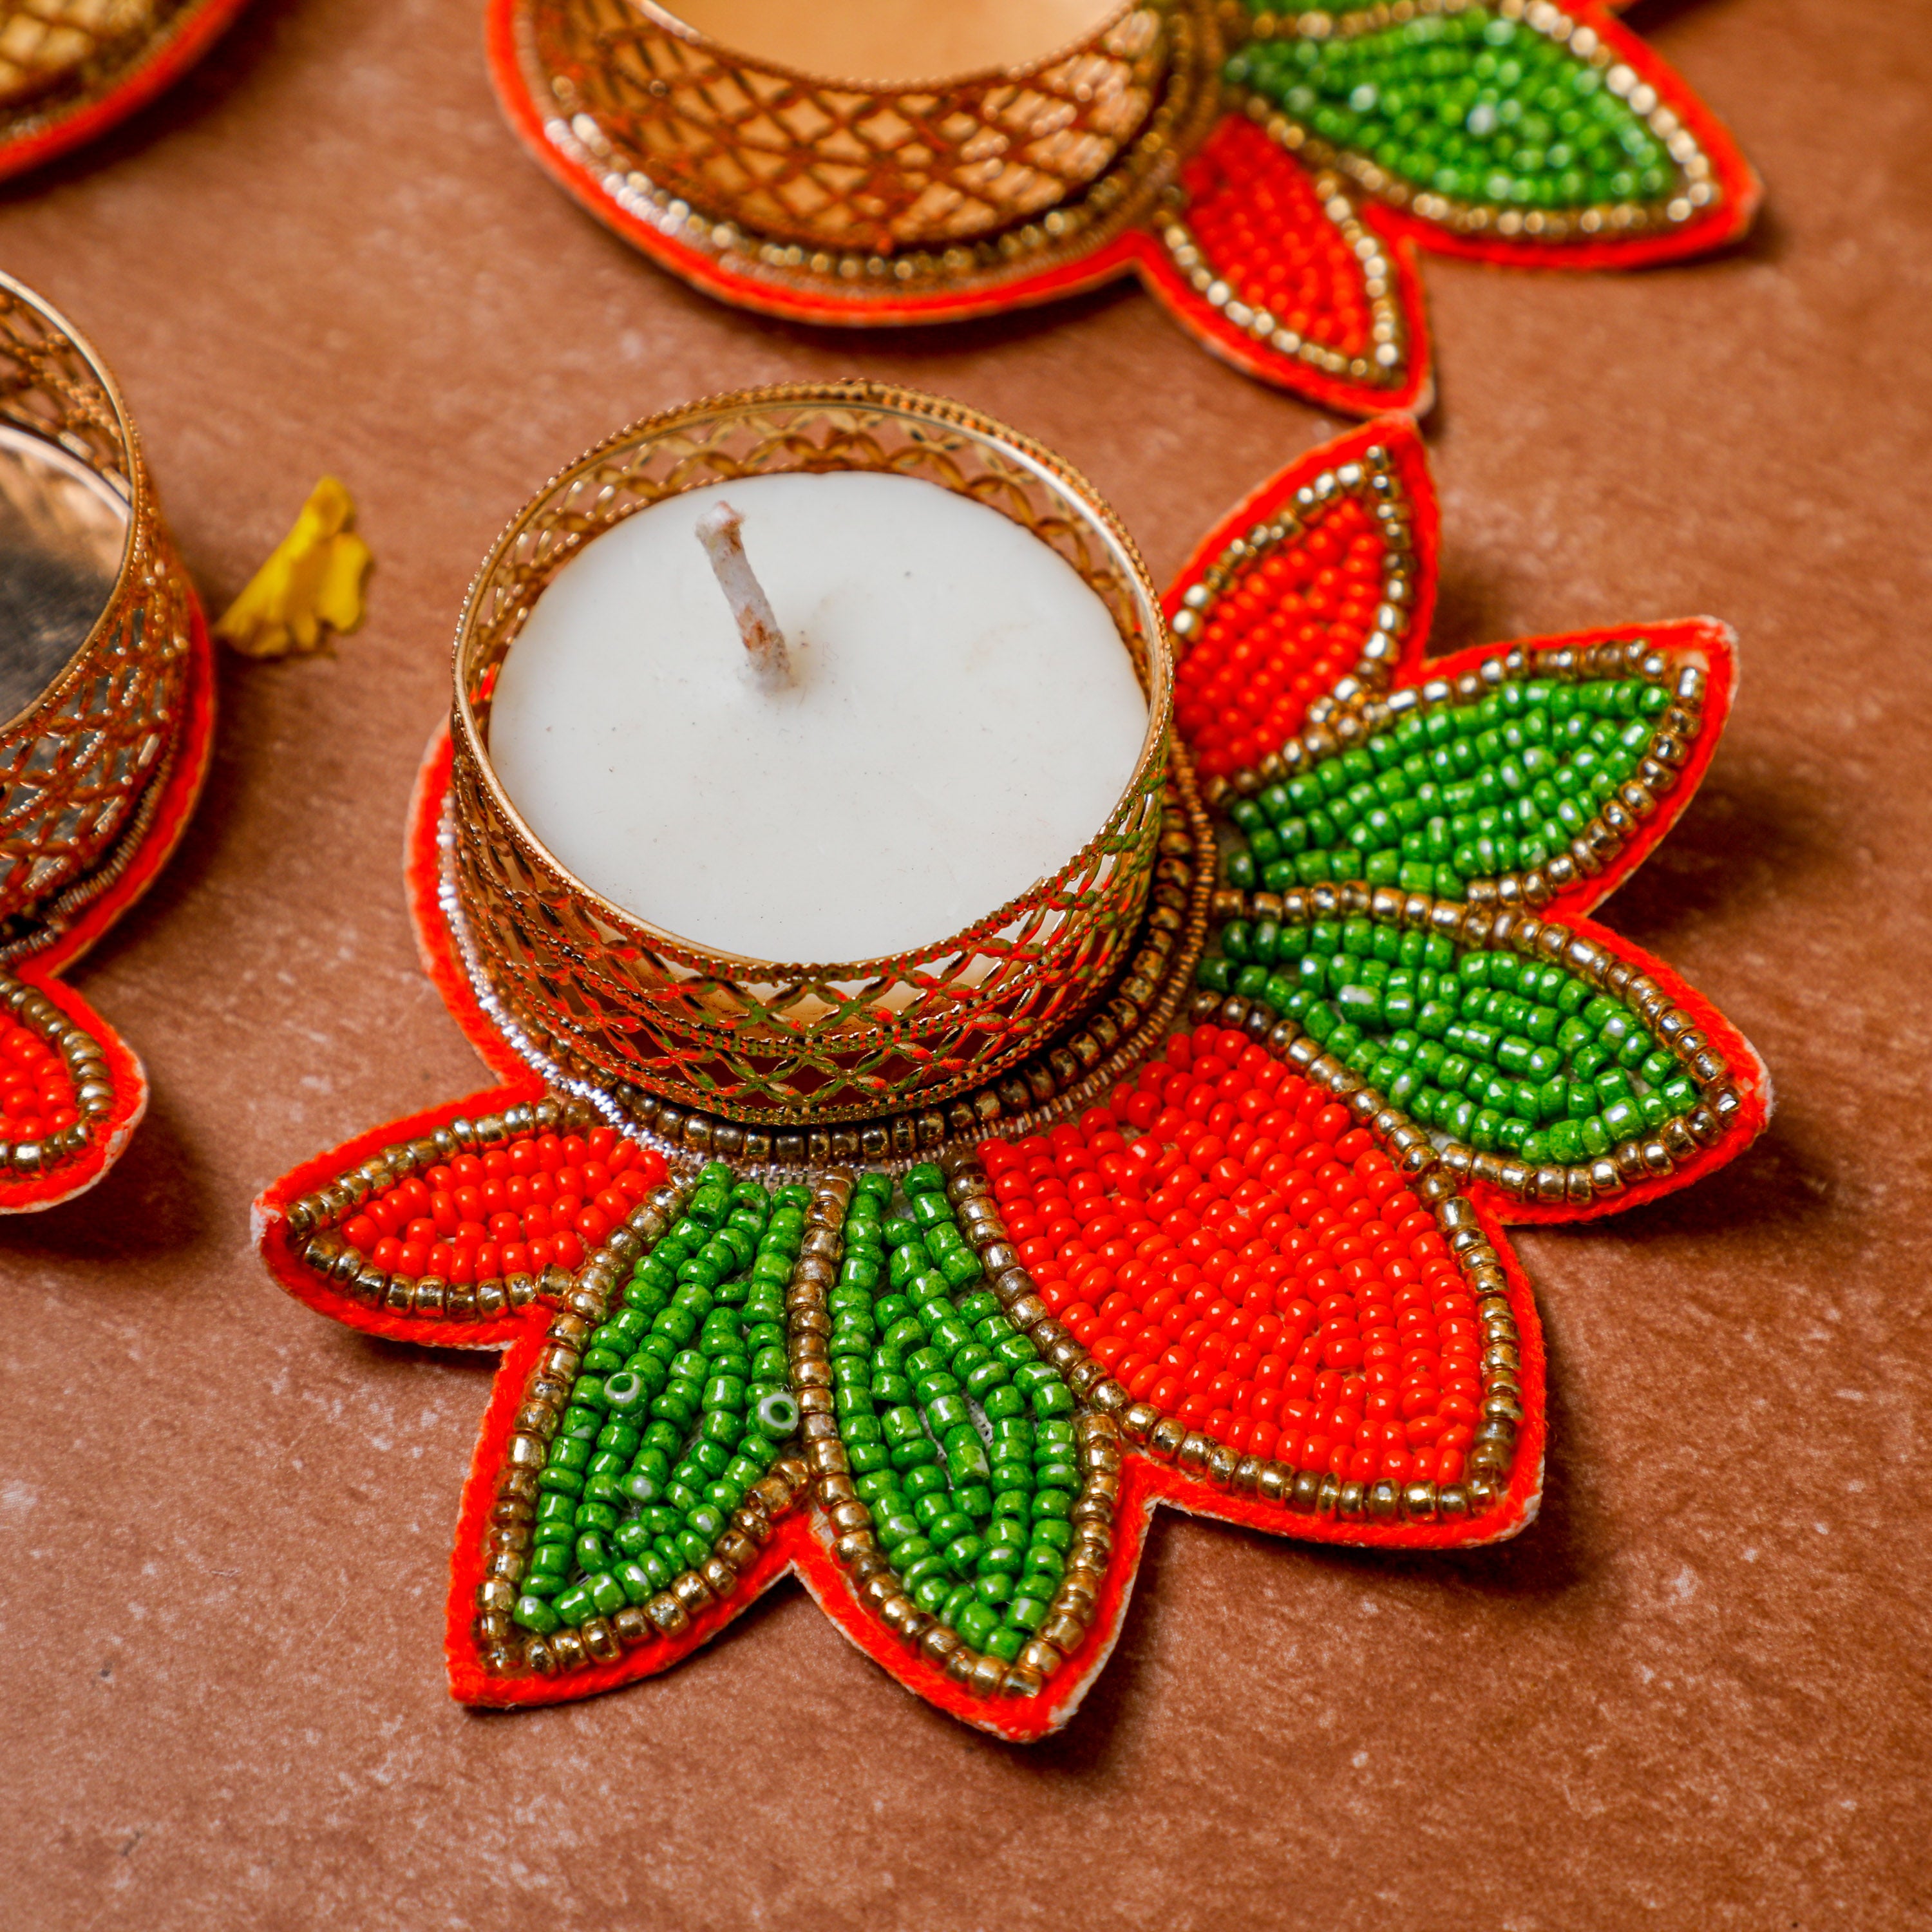 The tealight candle holder is ideal for enhancing your Diwali decorations